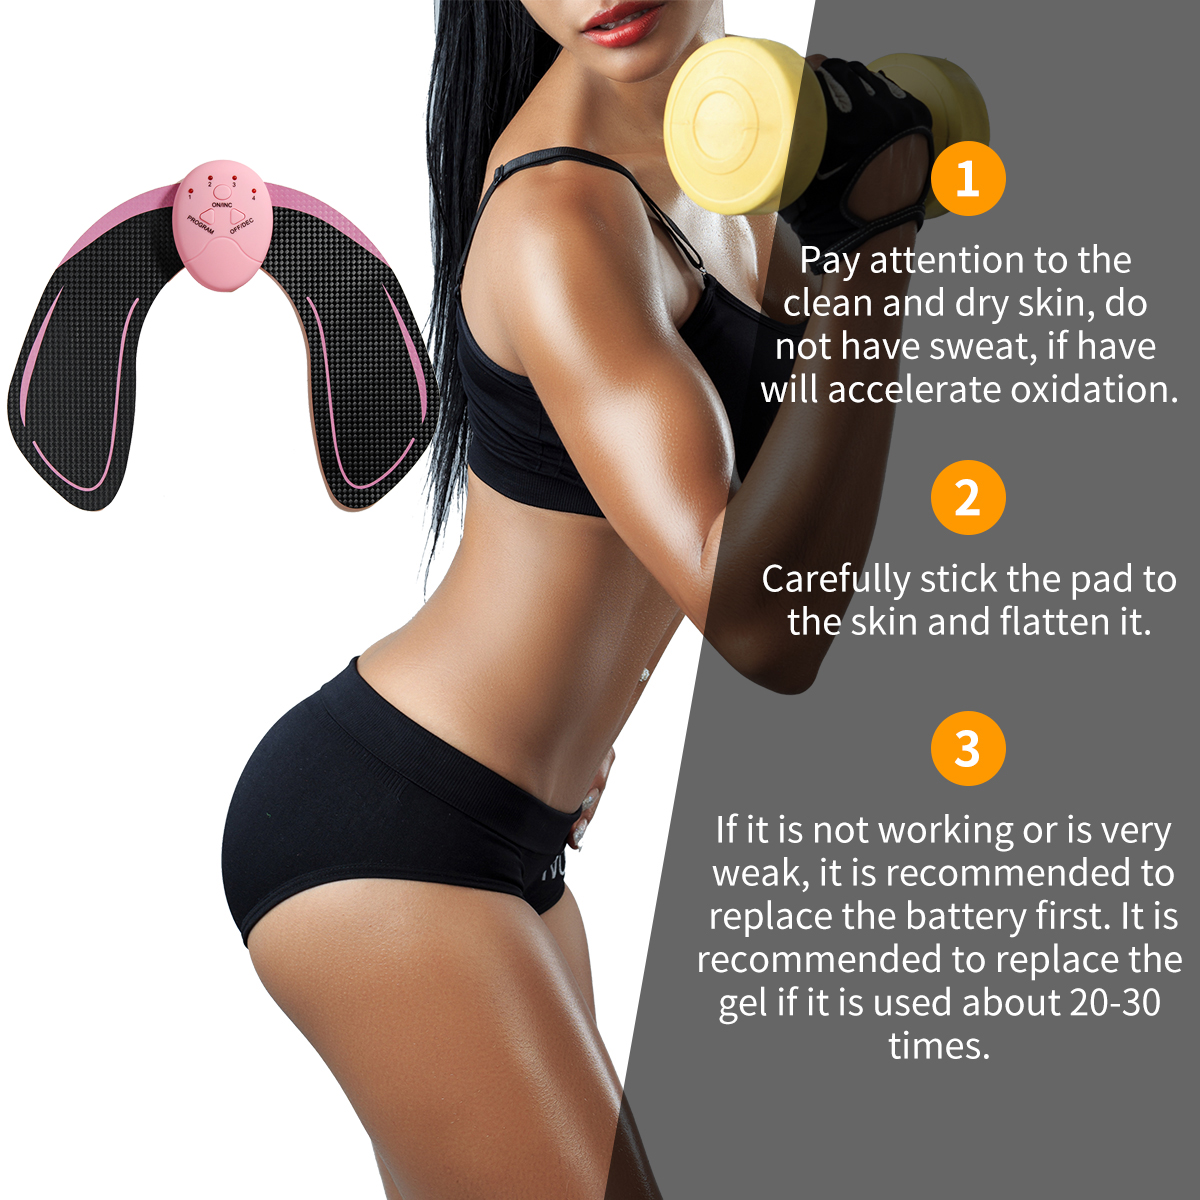 EMS-Hip-Trainer-PUABS-Buttocks-Fitness-Muscle-Stimulation-Body-Building-Shaper-Massager-1372254